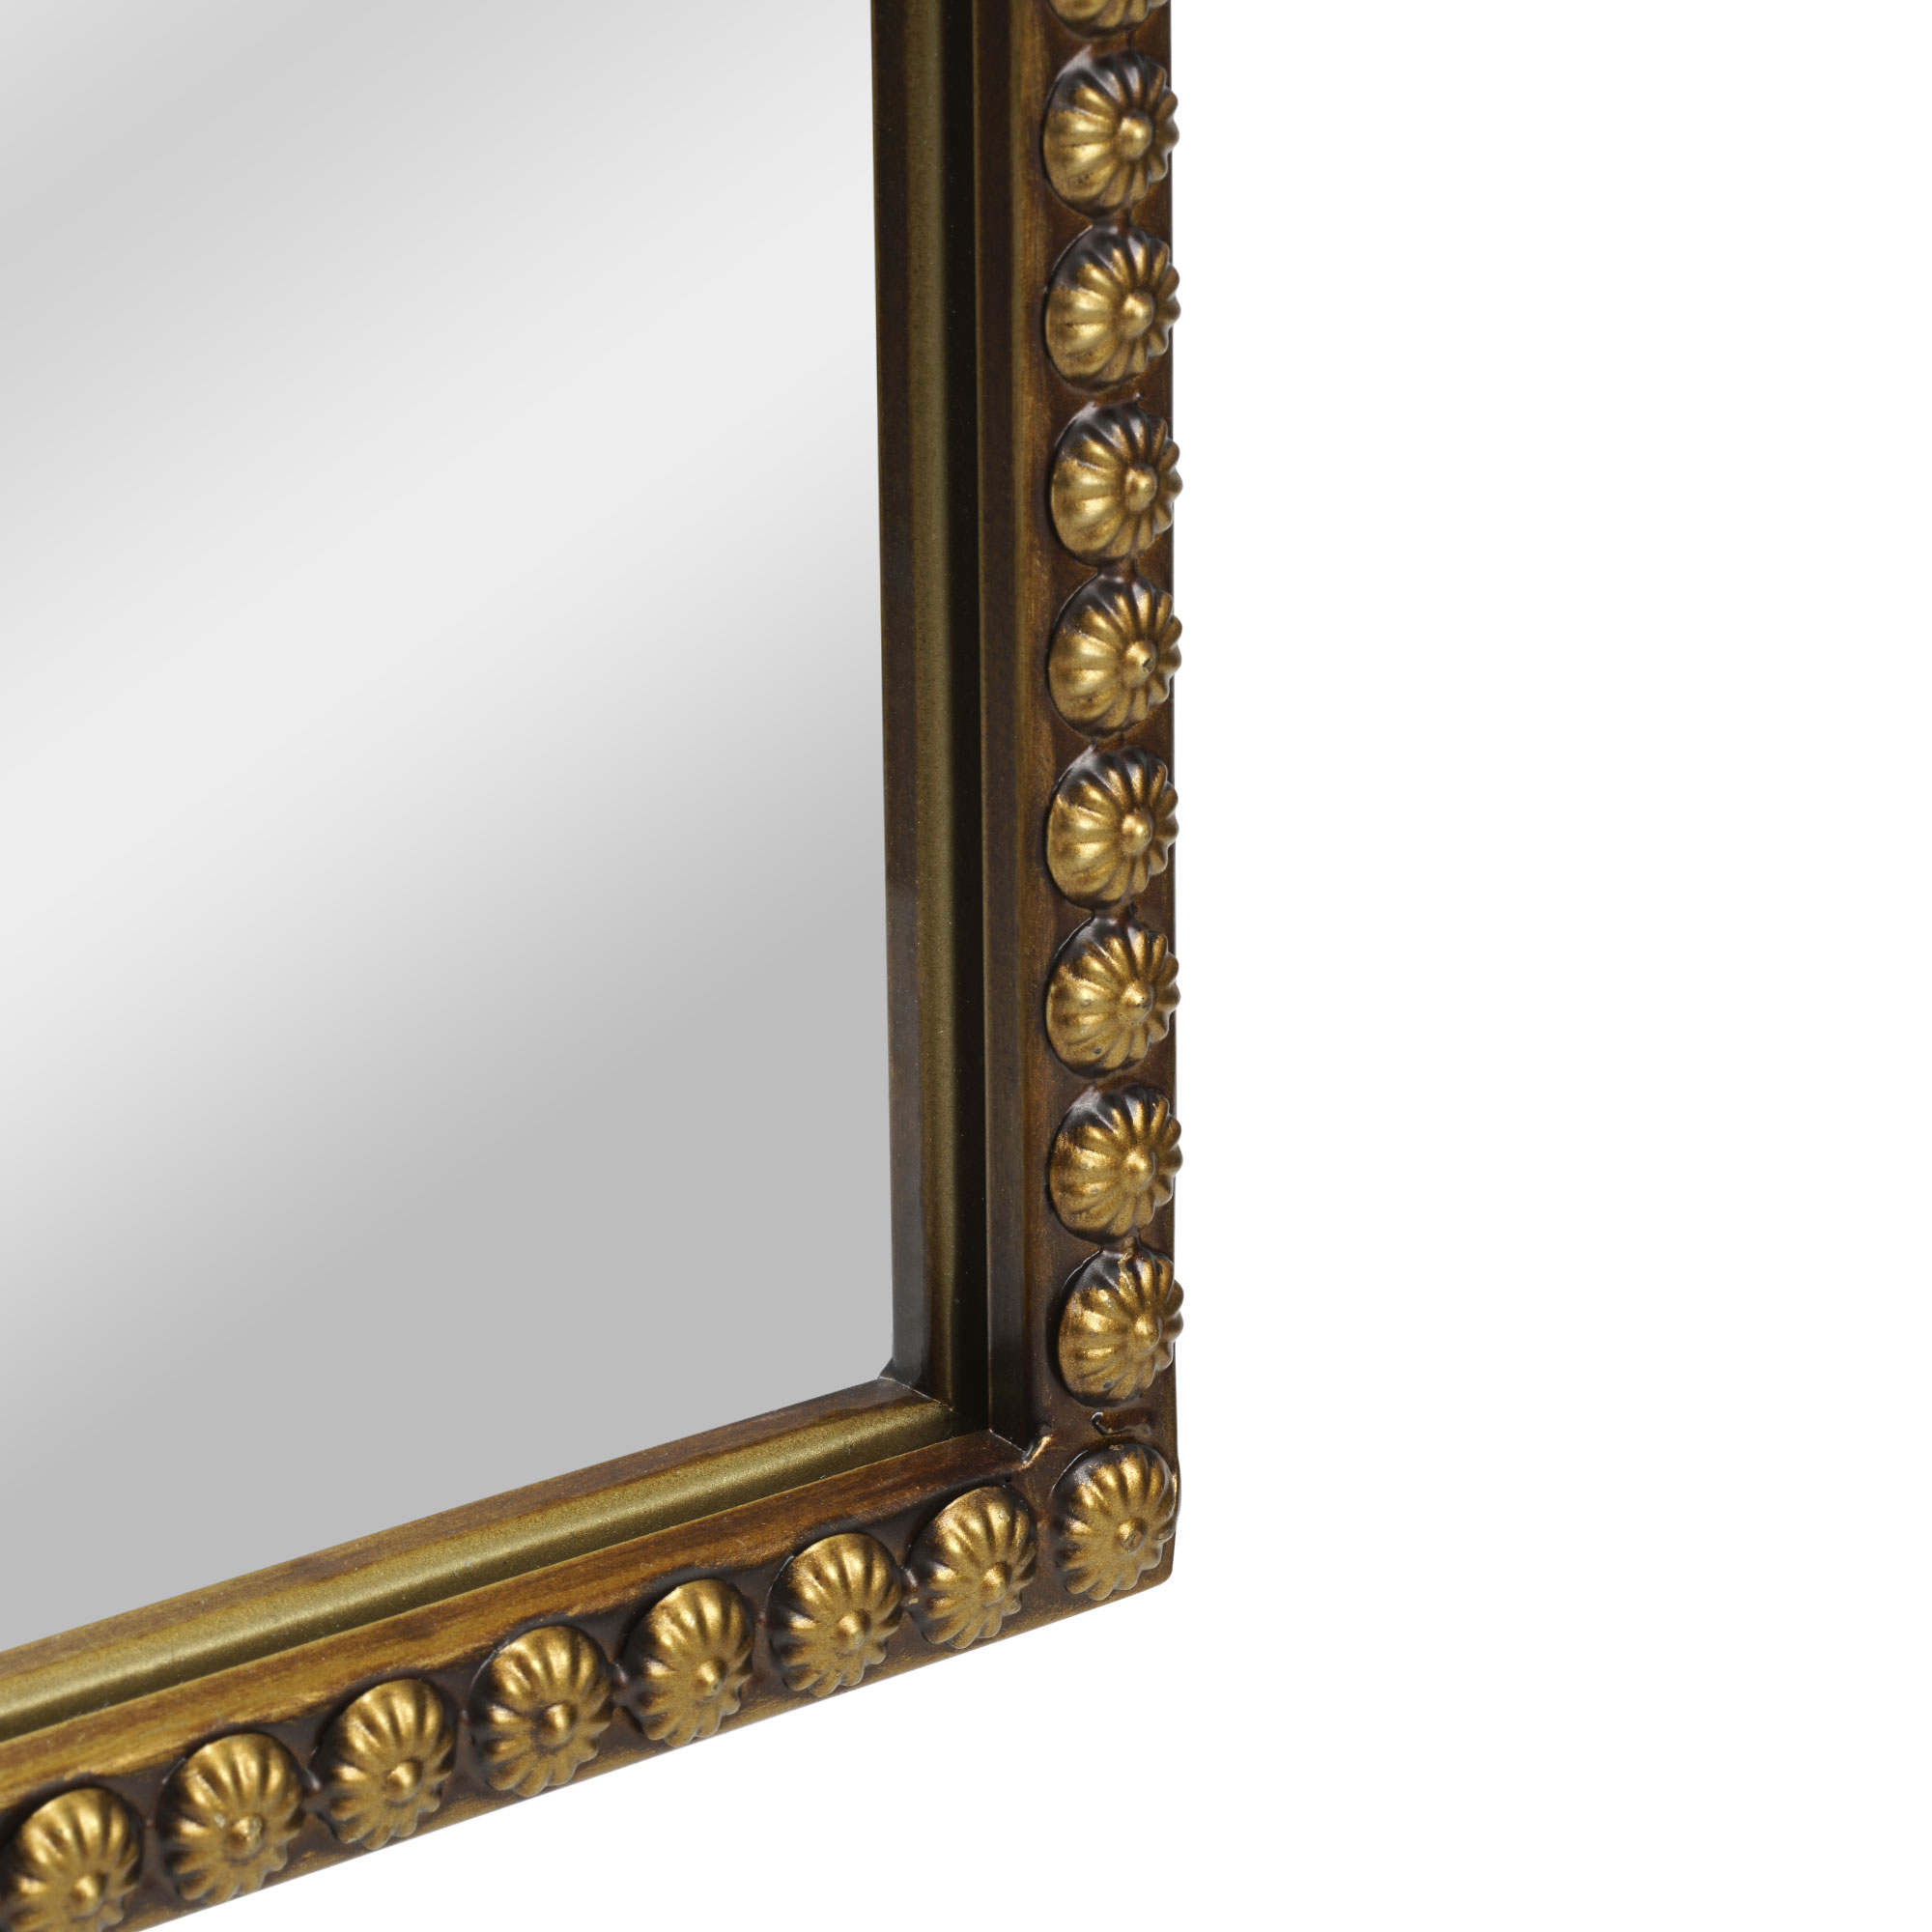 Better Homes & Gardens 20" x 30" Filigree Arch Metal Wall Mirror Decor in Gold - image 3 of 6